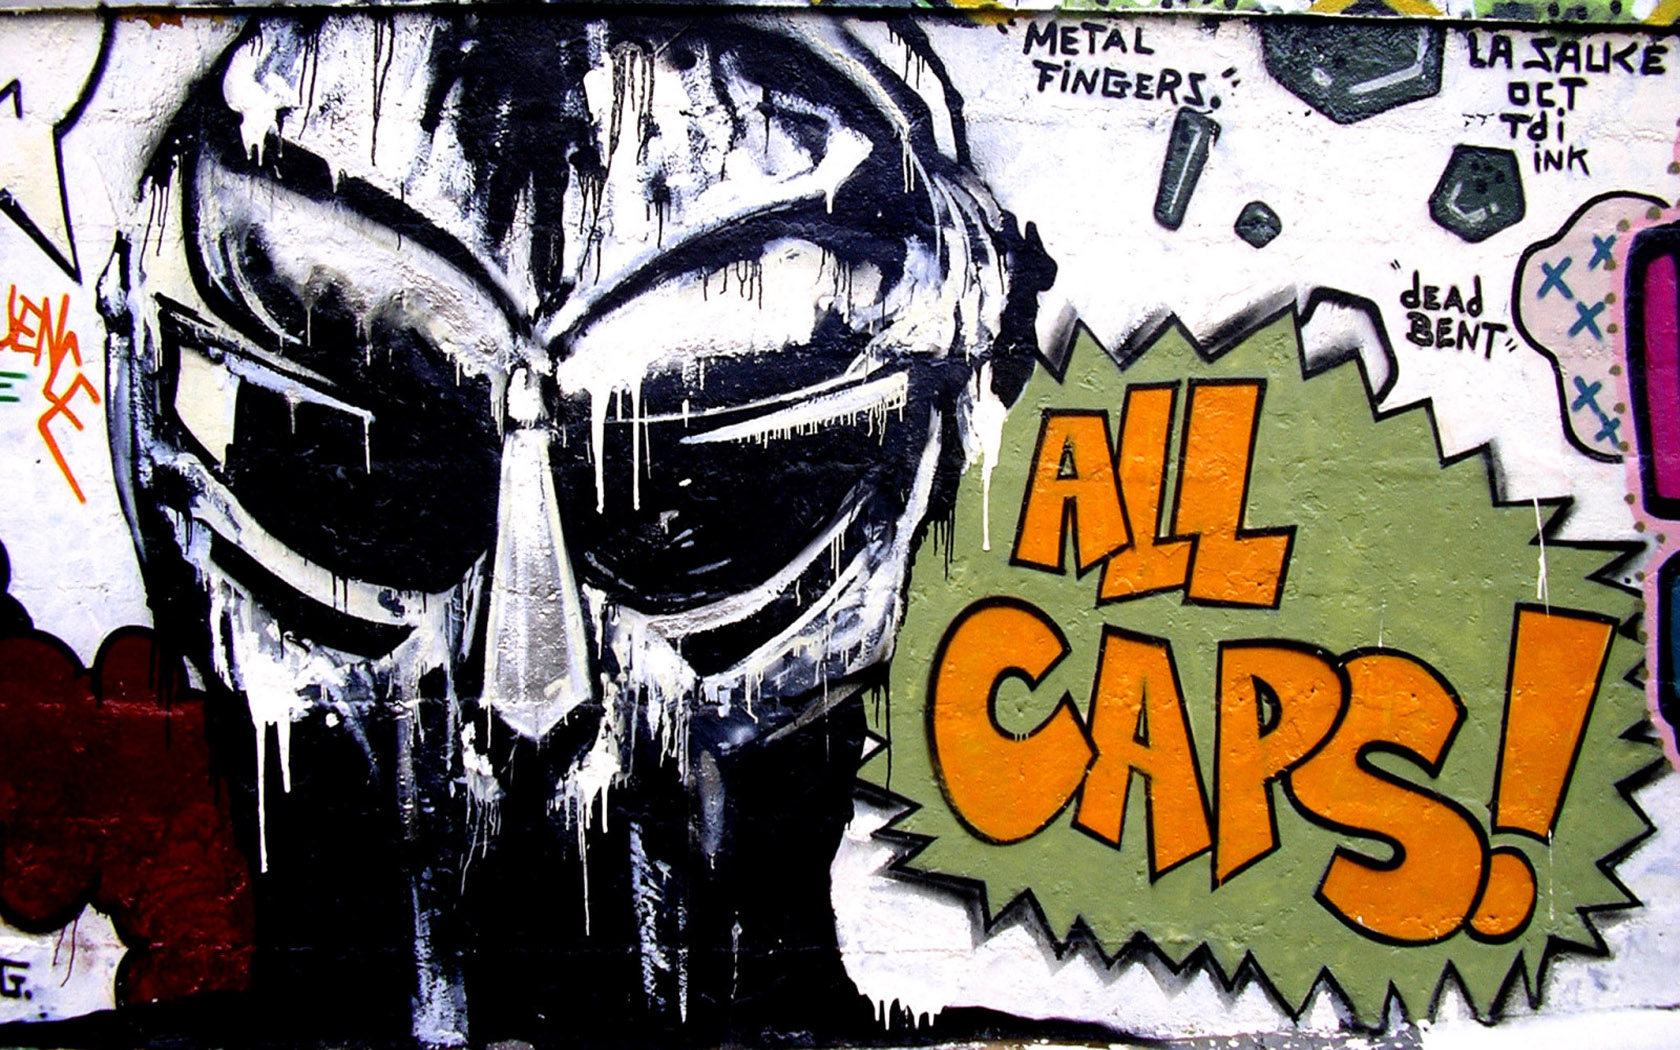 Nice Images Collection: Madvillain Desktop Wallpapers